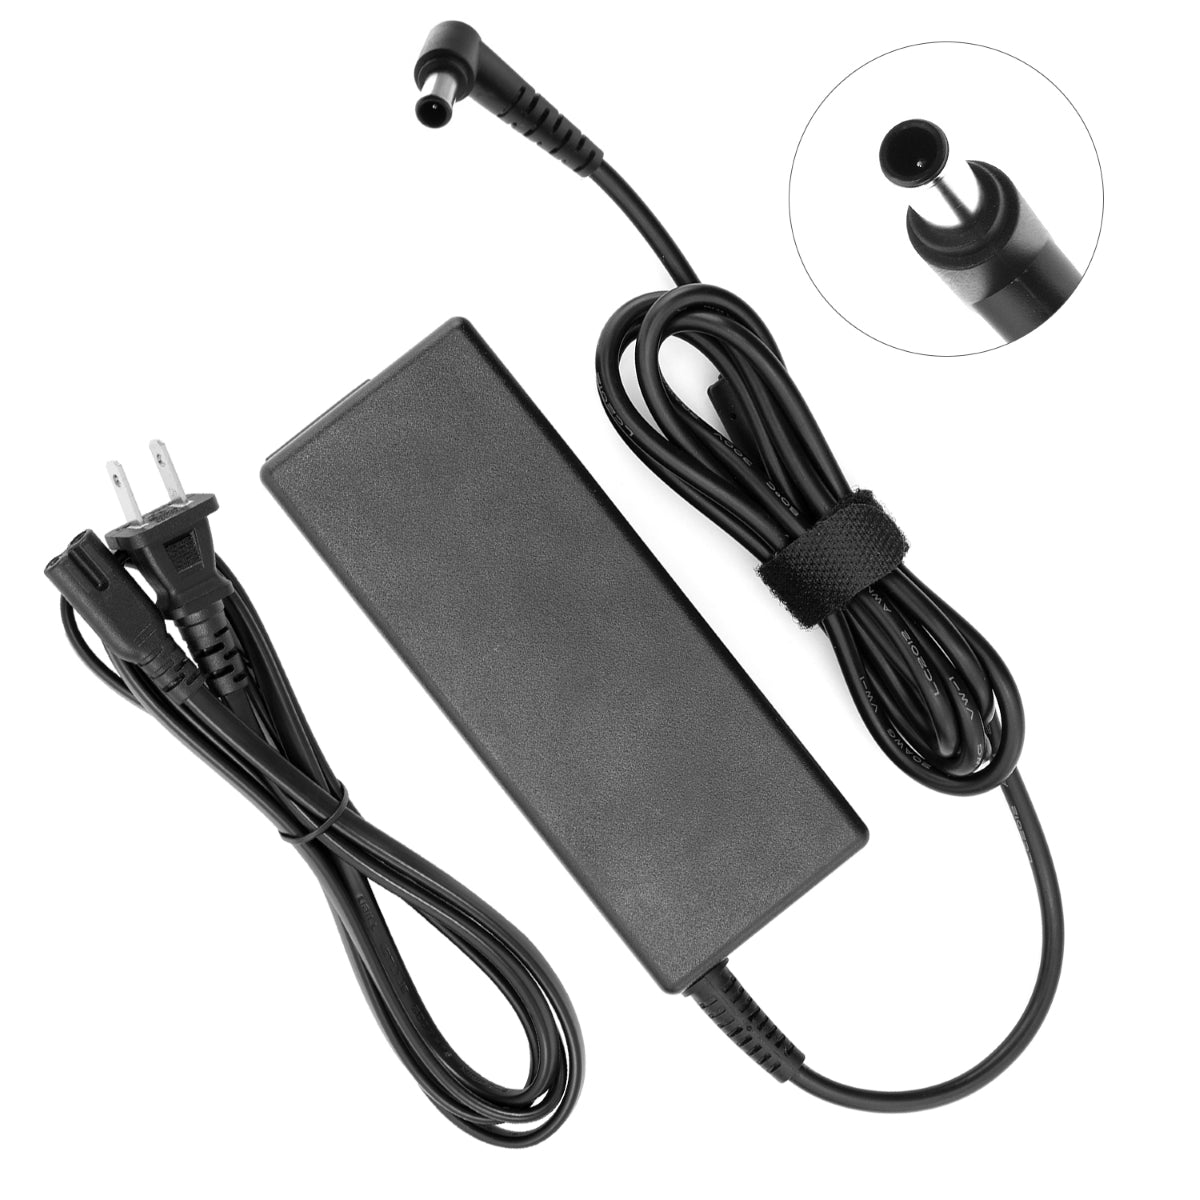 AC Adapter Power Supply for Samsung C32F391FW TV Display